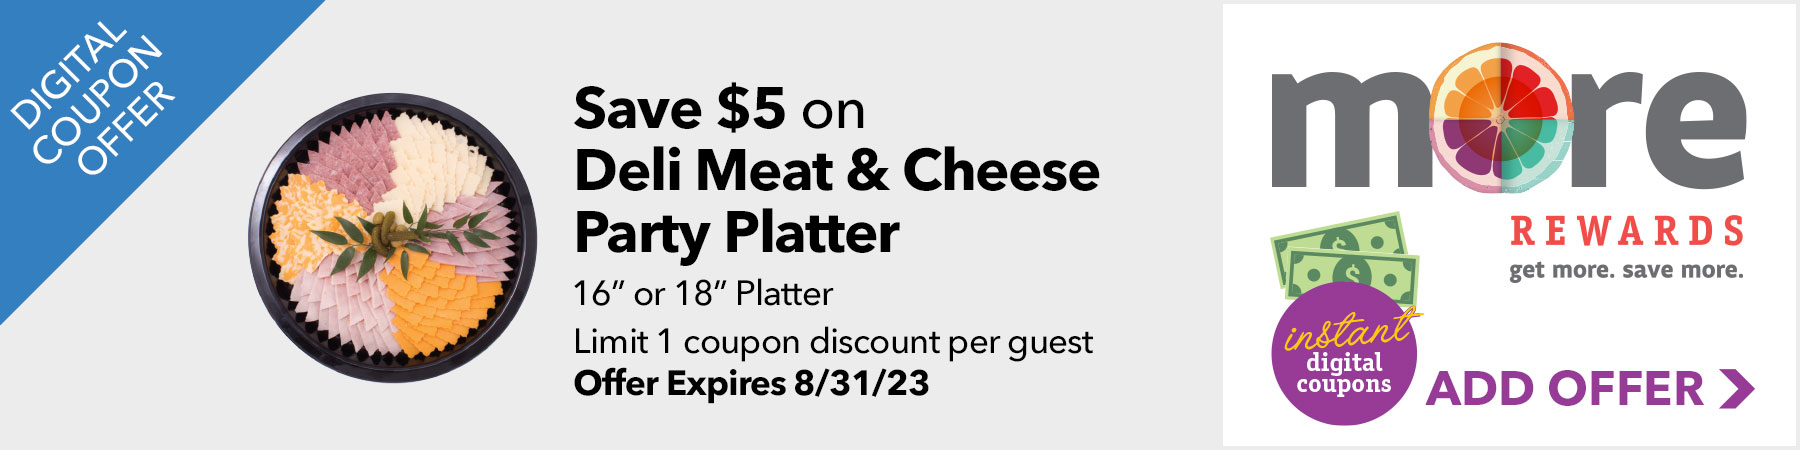 Deli Meat and Cheese Party Platter - Digital Coupon